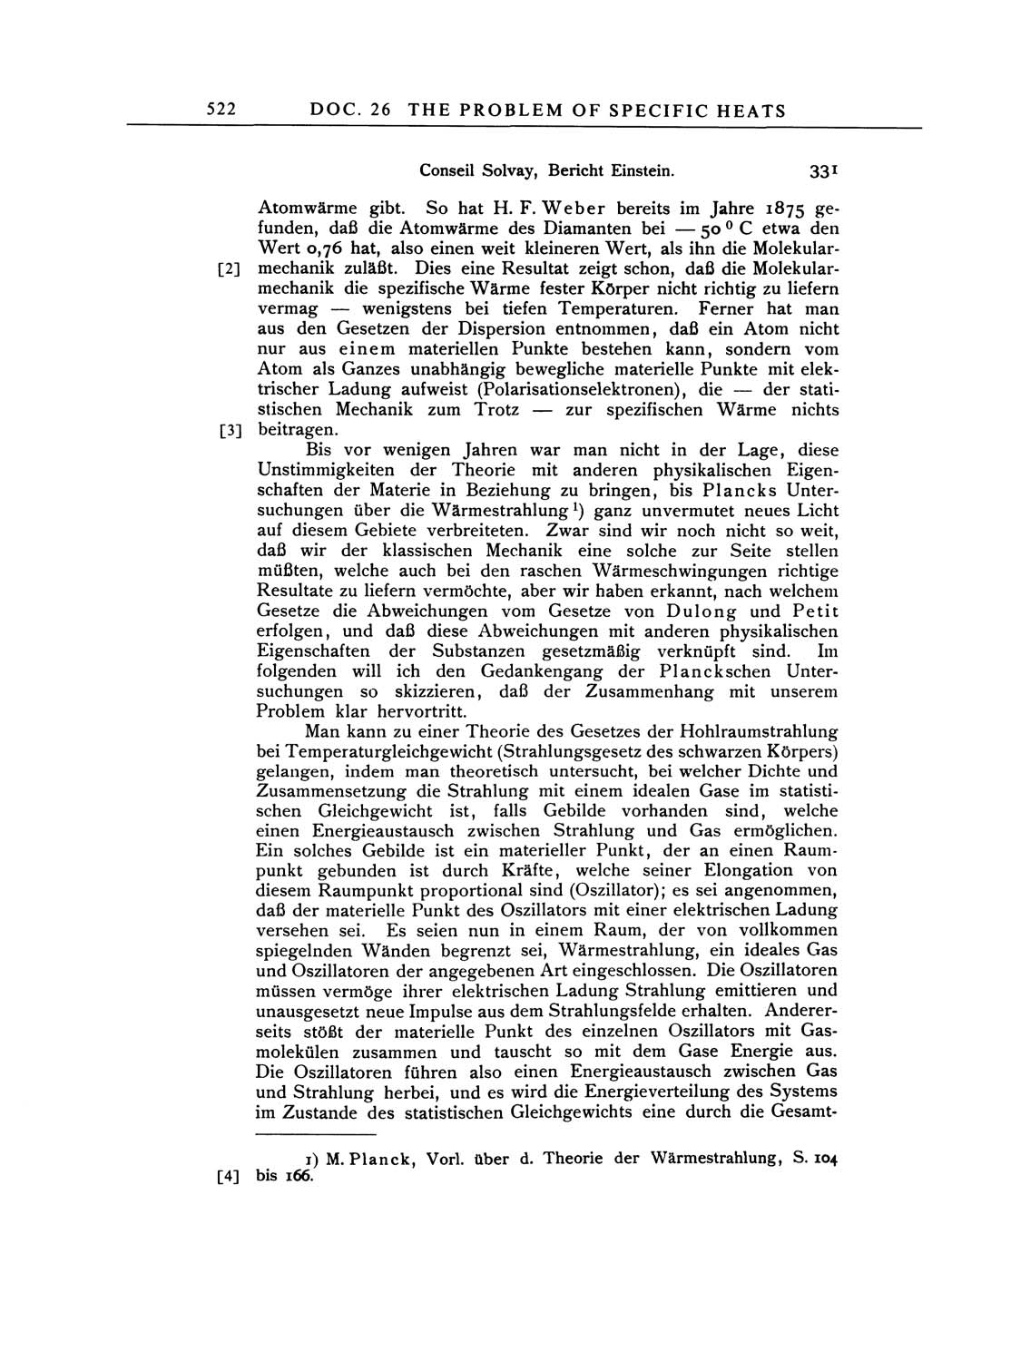 Volume 3: The Swiss Years: Writings 1909-1911 page 522